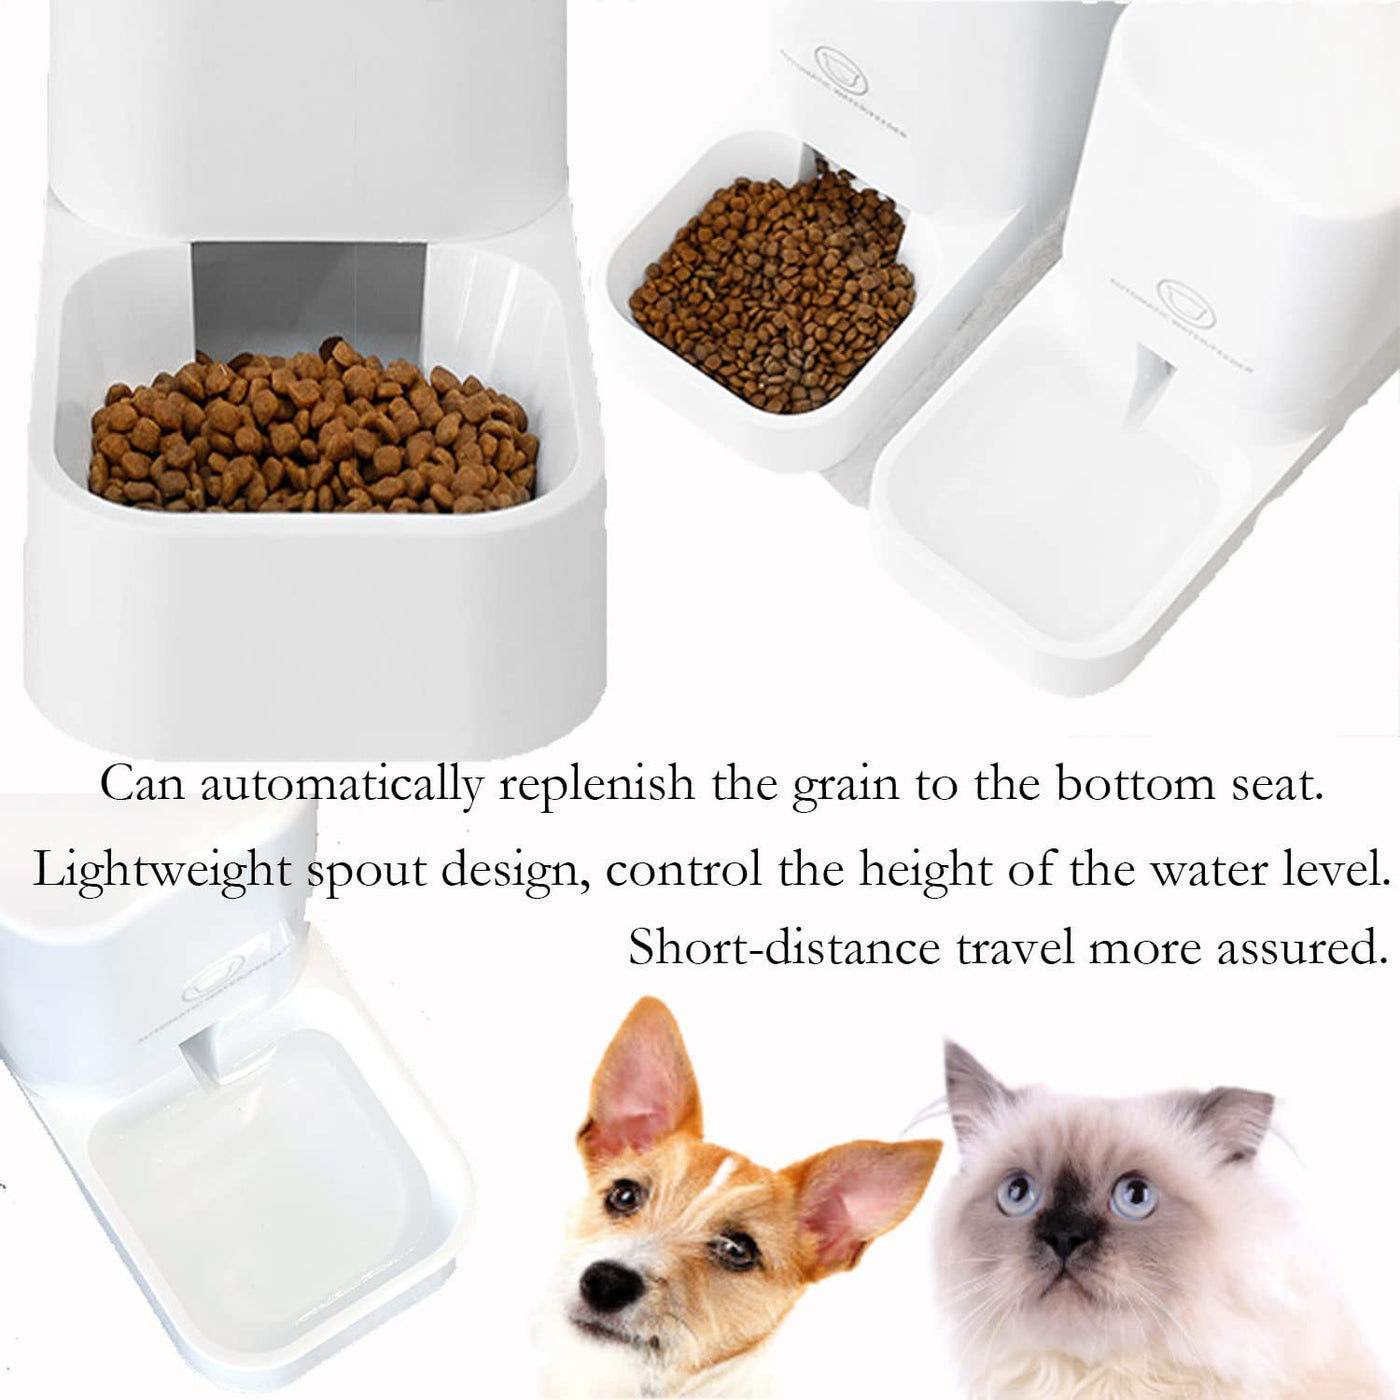  Cat or Dog Feeder and Waterer Pet Self-Dispensing, Automatic Cat Feeders, Cat Food Dispenser, Gravity Food Feeder and Waterer Set with Pet Food Bowl for Small Medium Big Dog 